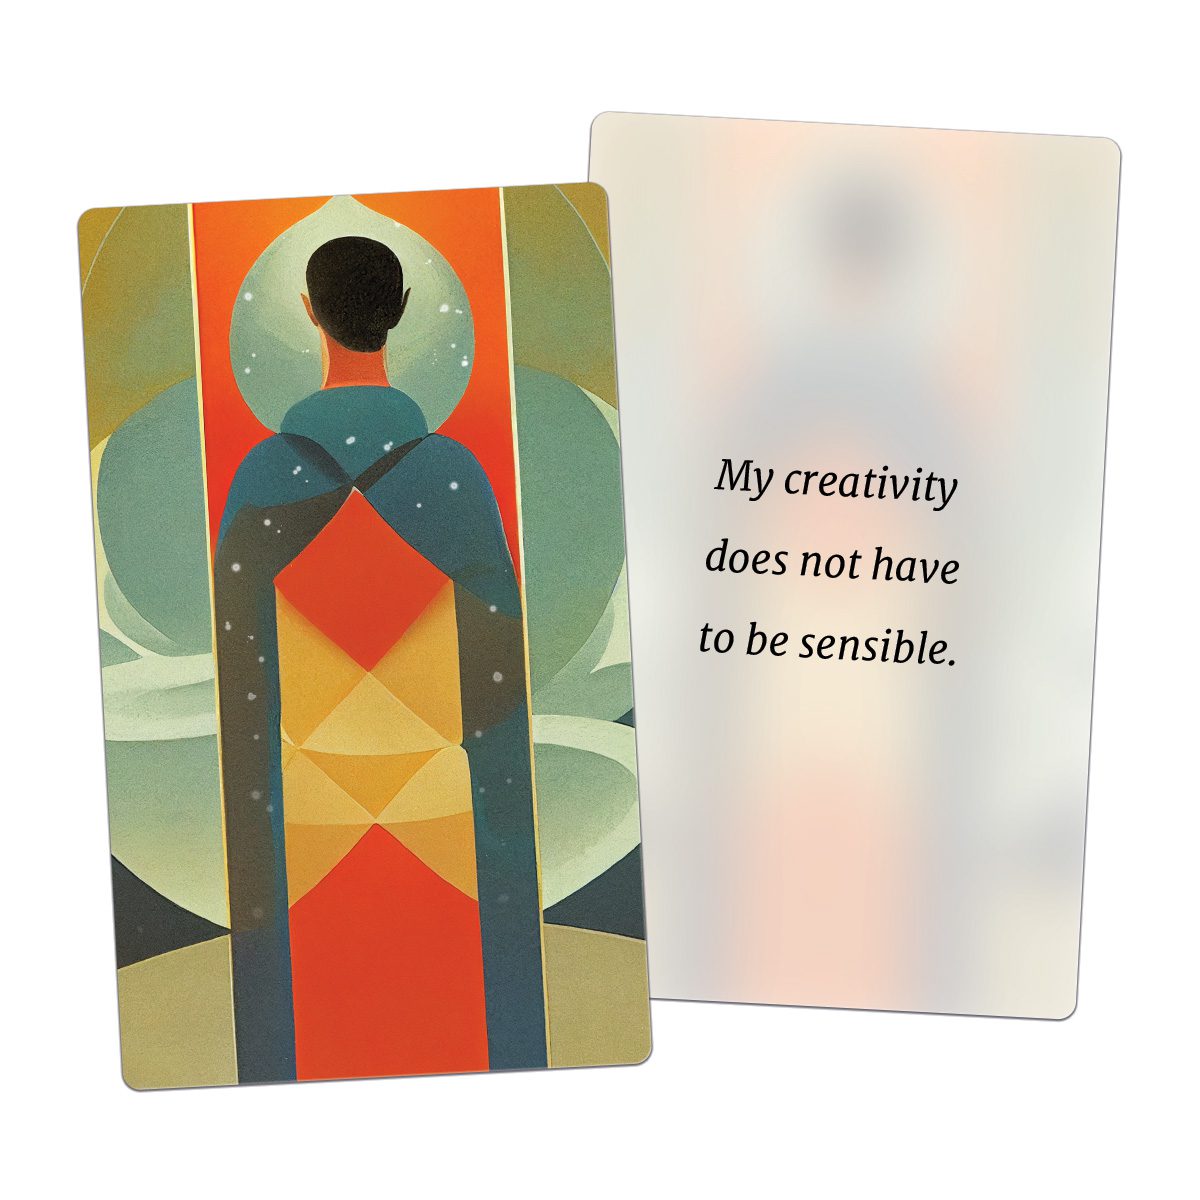 My creativity does not have to be sensible. (AFFIRMATION CARD)